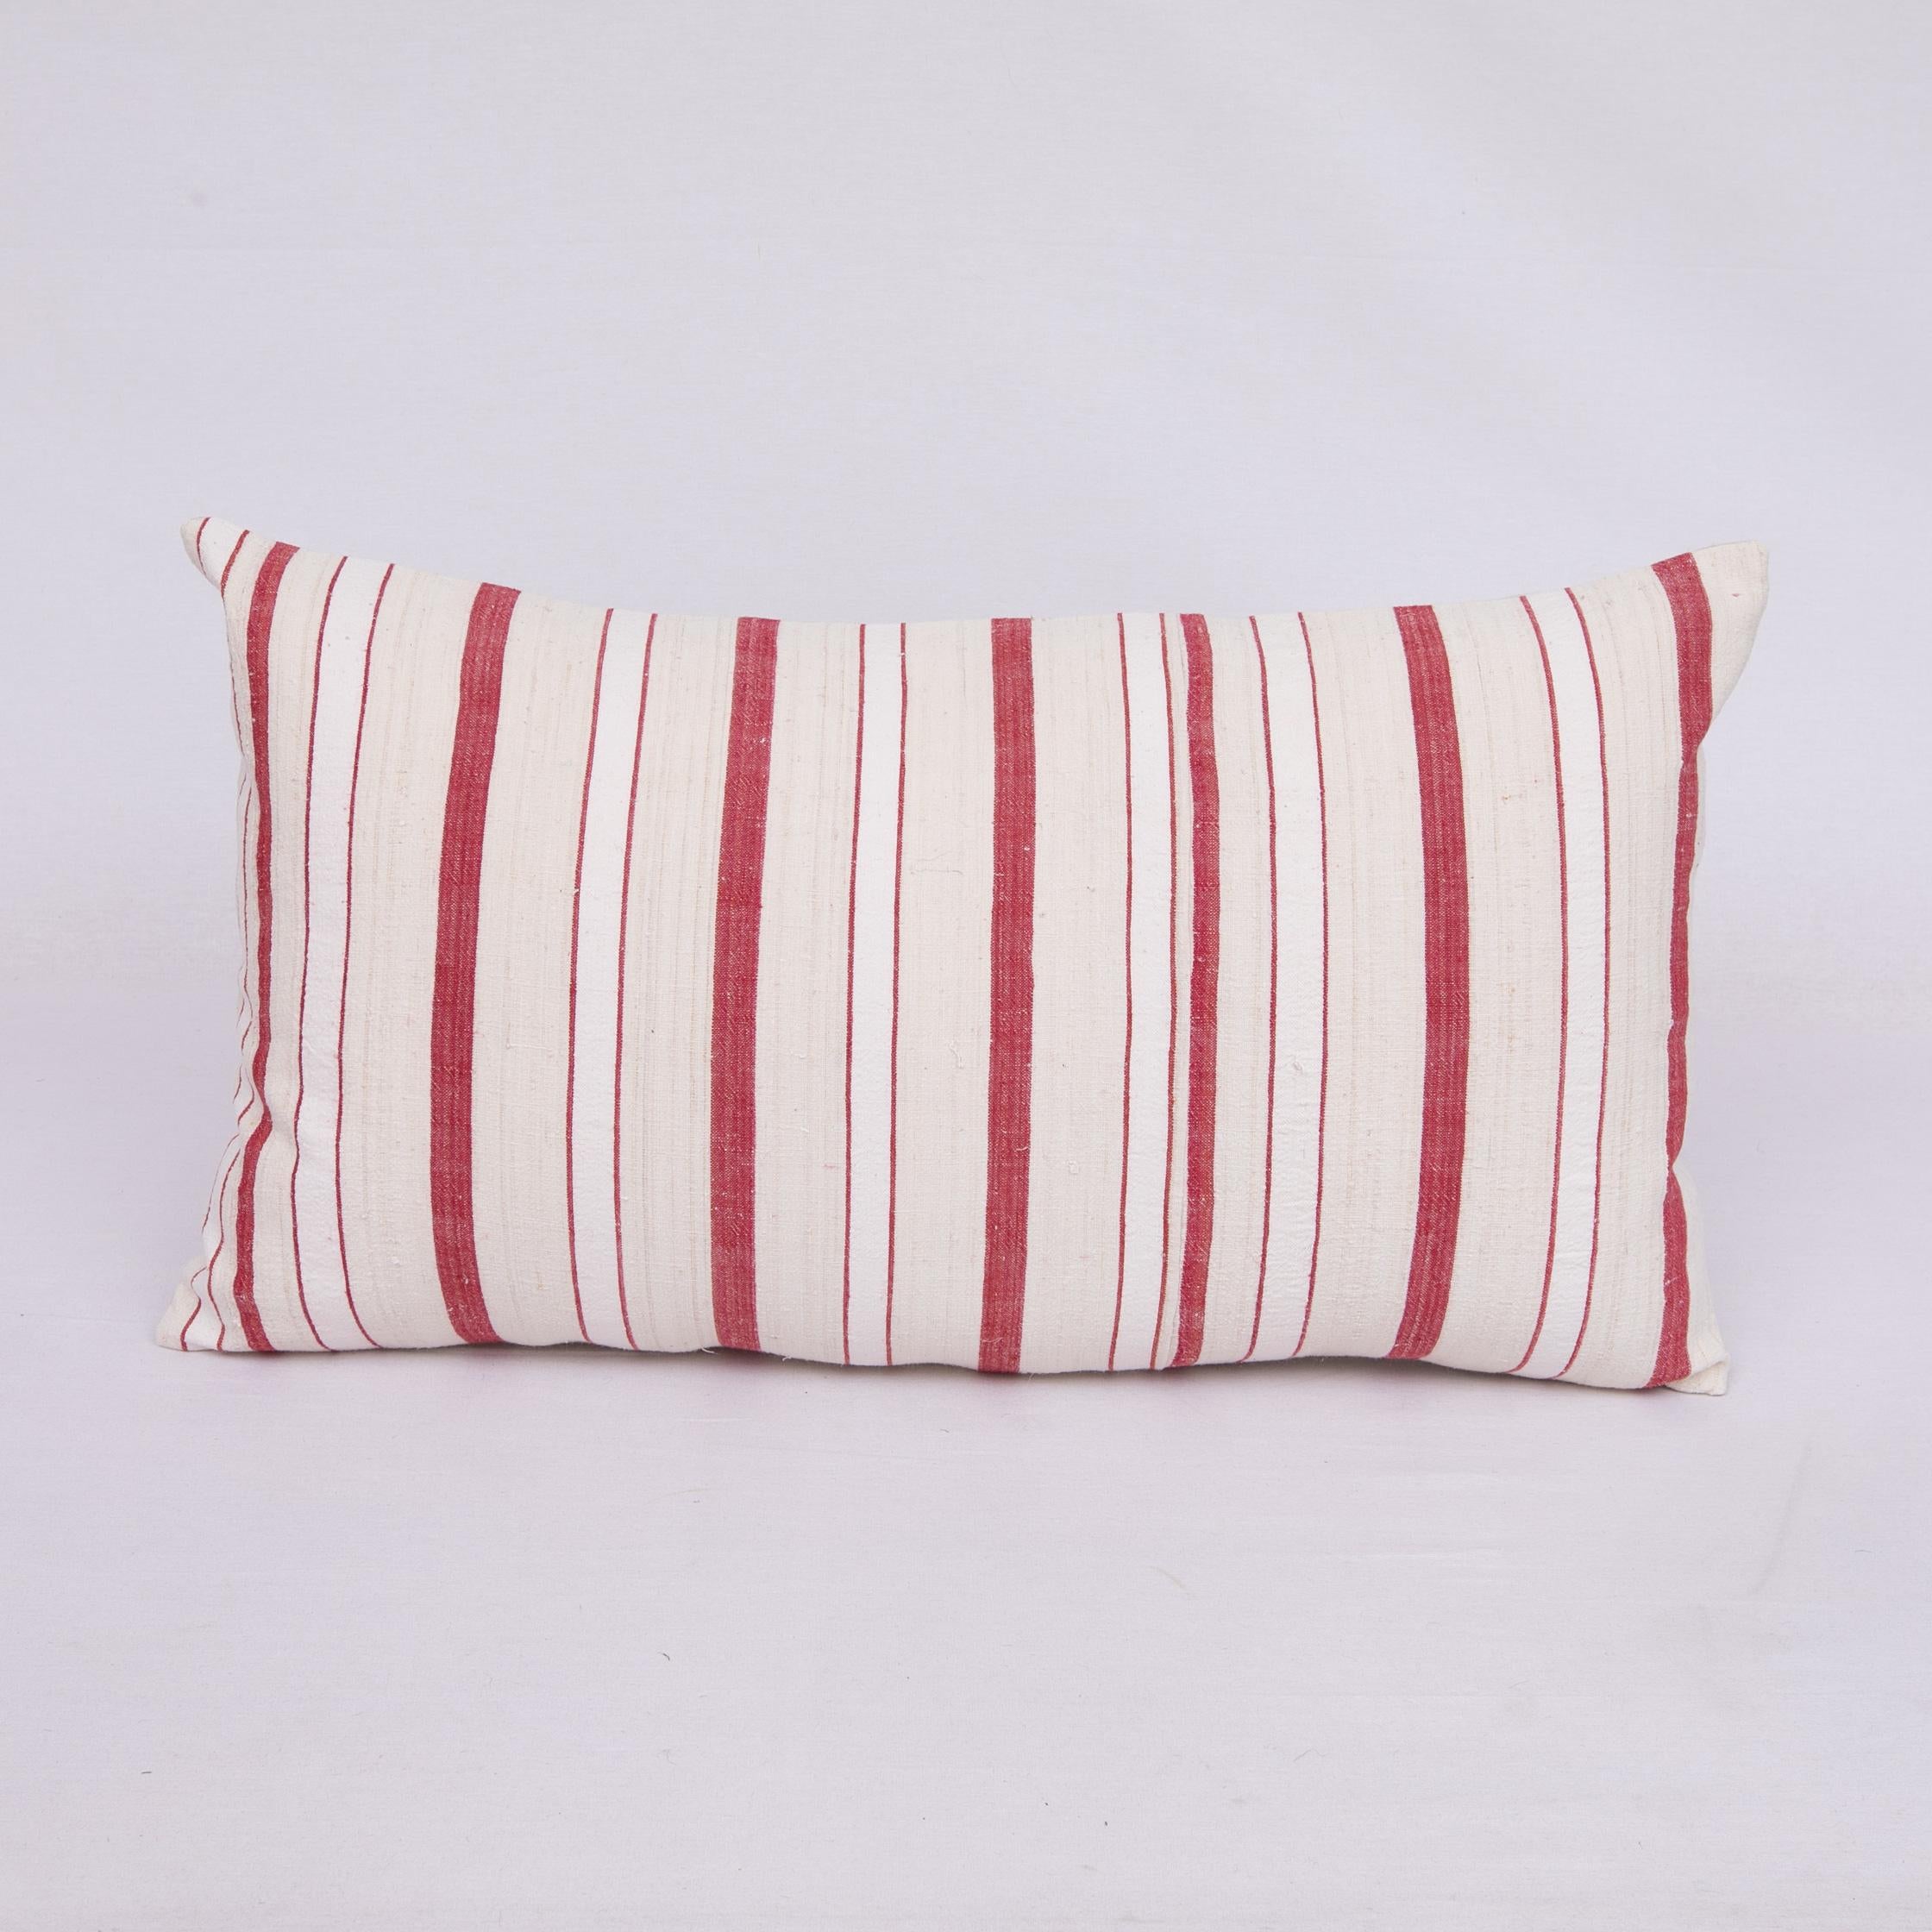 Pillow Cover is made from a hand woven cotton fabric, woven in Anatolia, Turkey.
It does not come with an insert.
Cotton in the back.
Zipper closure.
Dry clean is recommended.